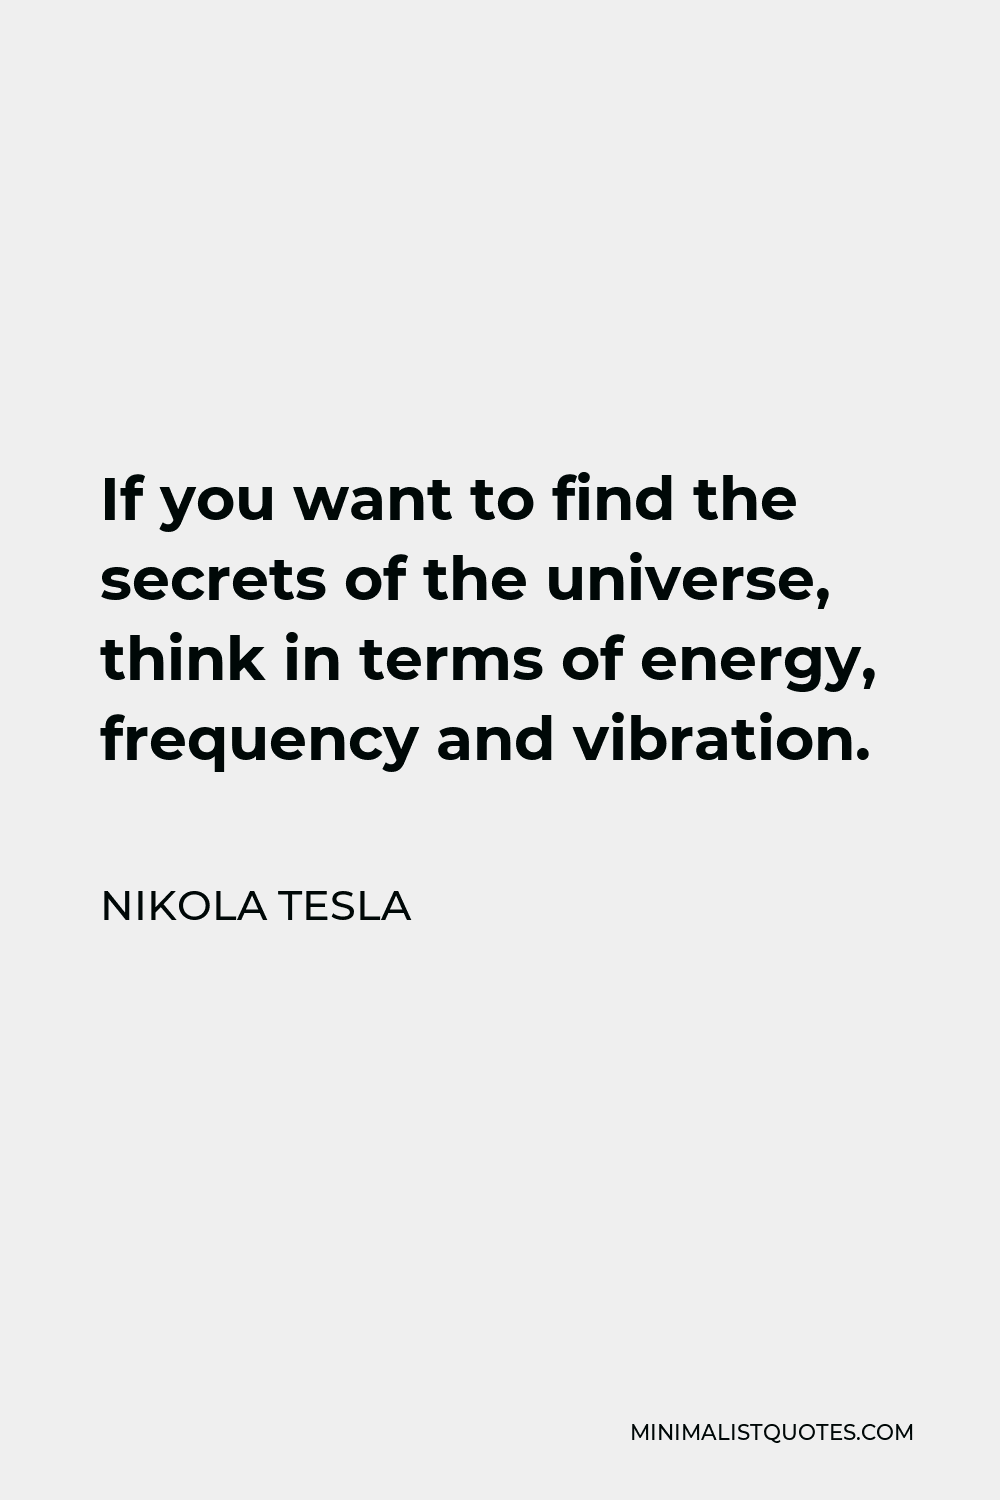 Nikola Tesla Quote - If you want to find the secrets of the universe, think in terms of energy, frequency and vibration.